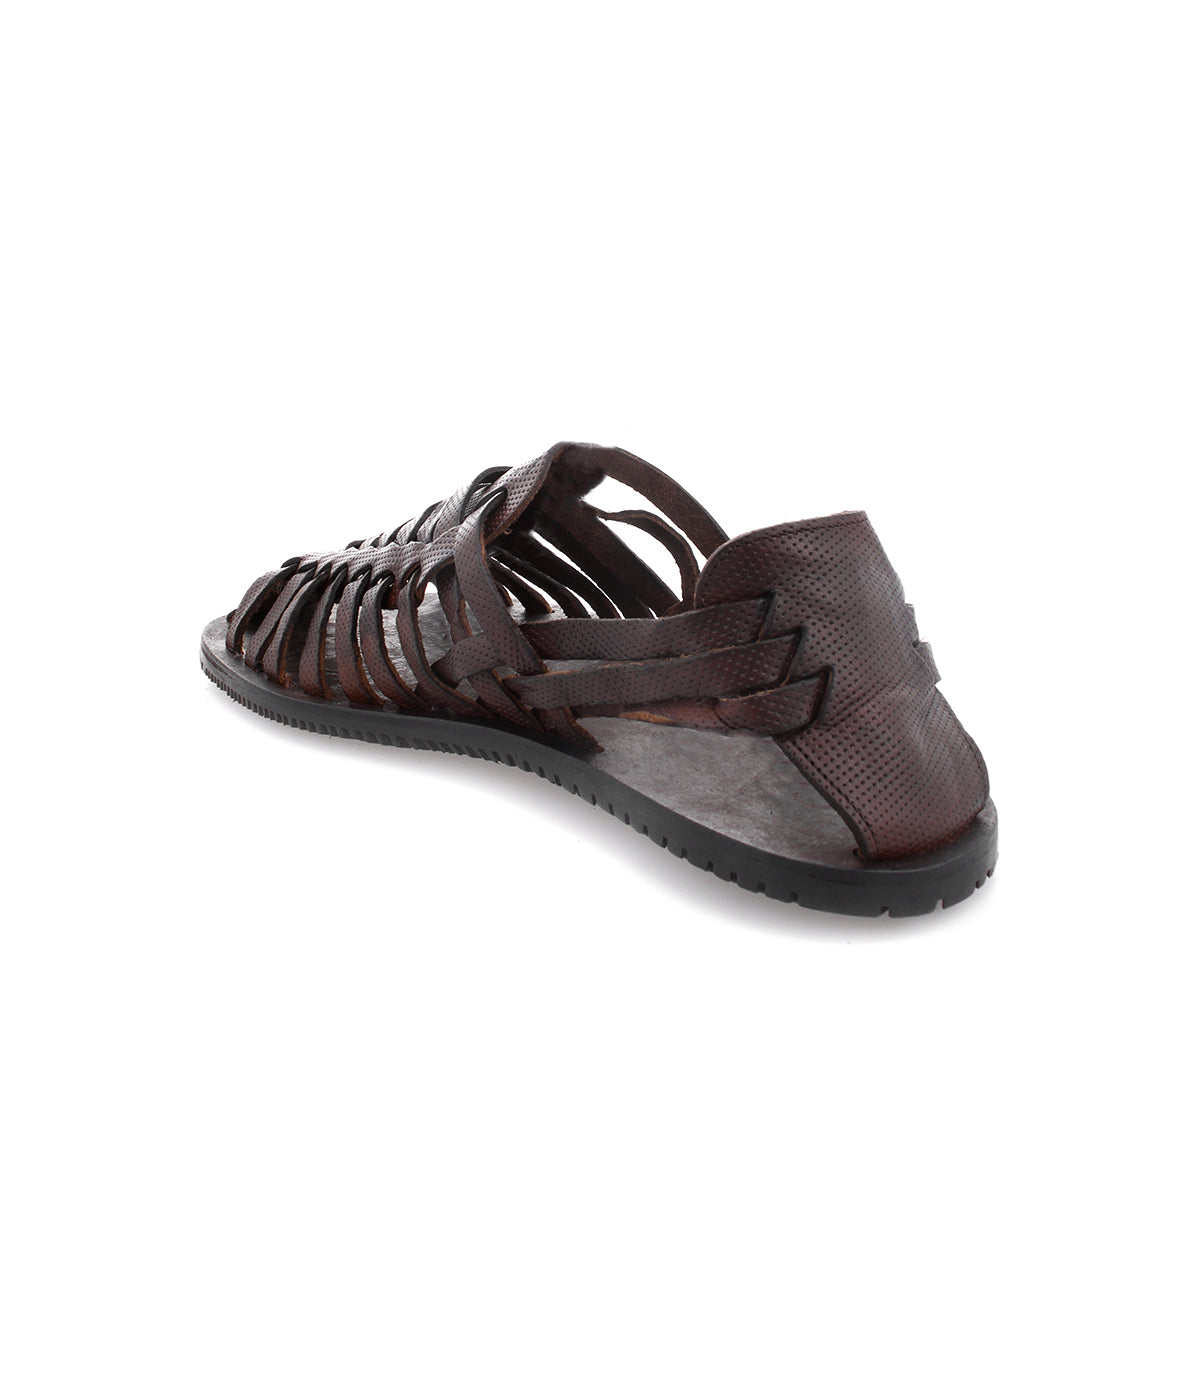 Italian closed-toe Insider fisherman sandals for men, combining summer sophistication with brown leather.